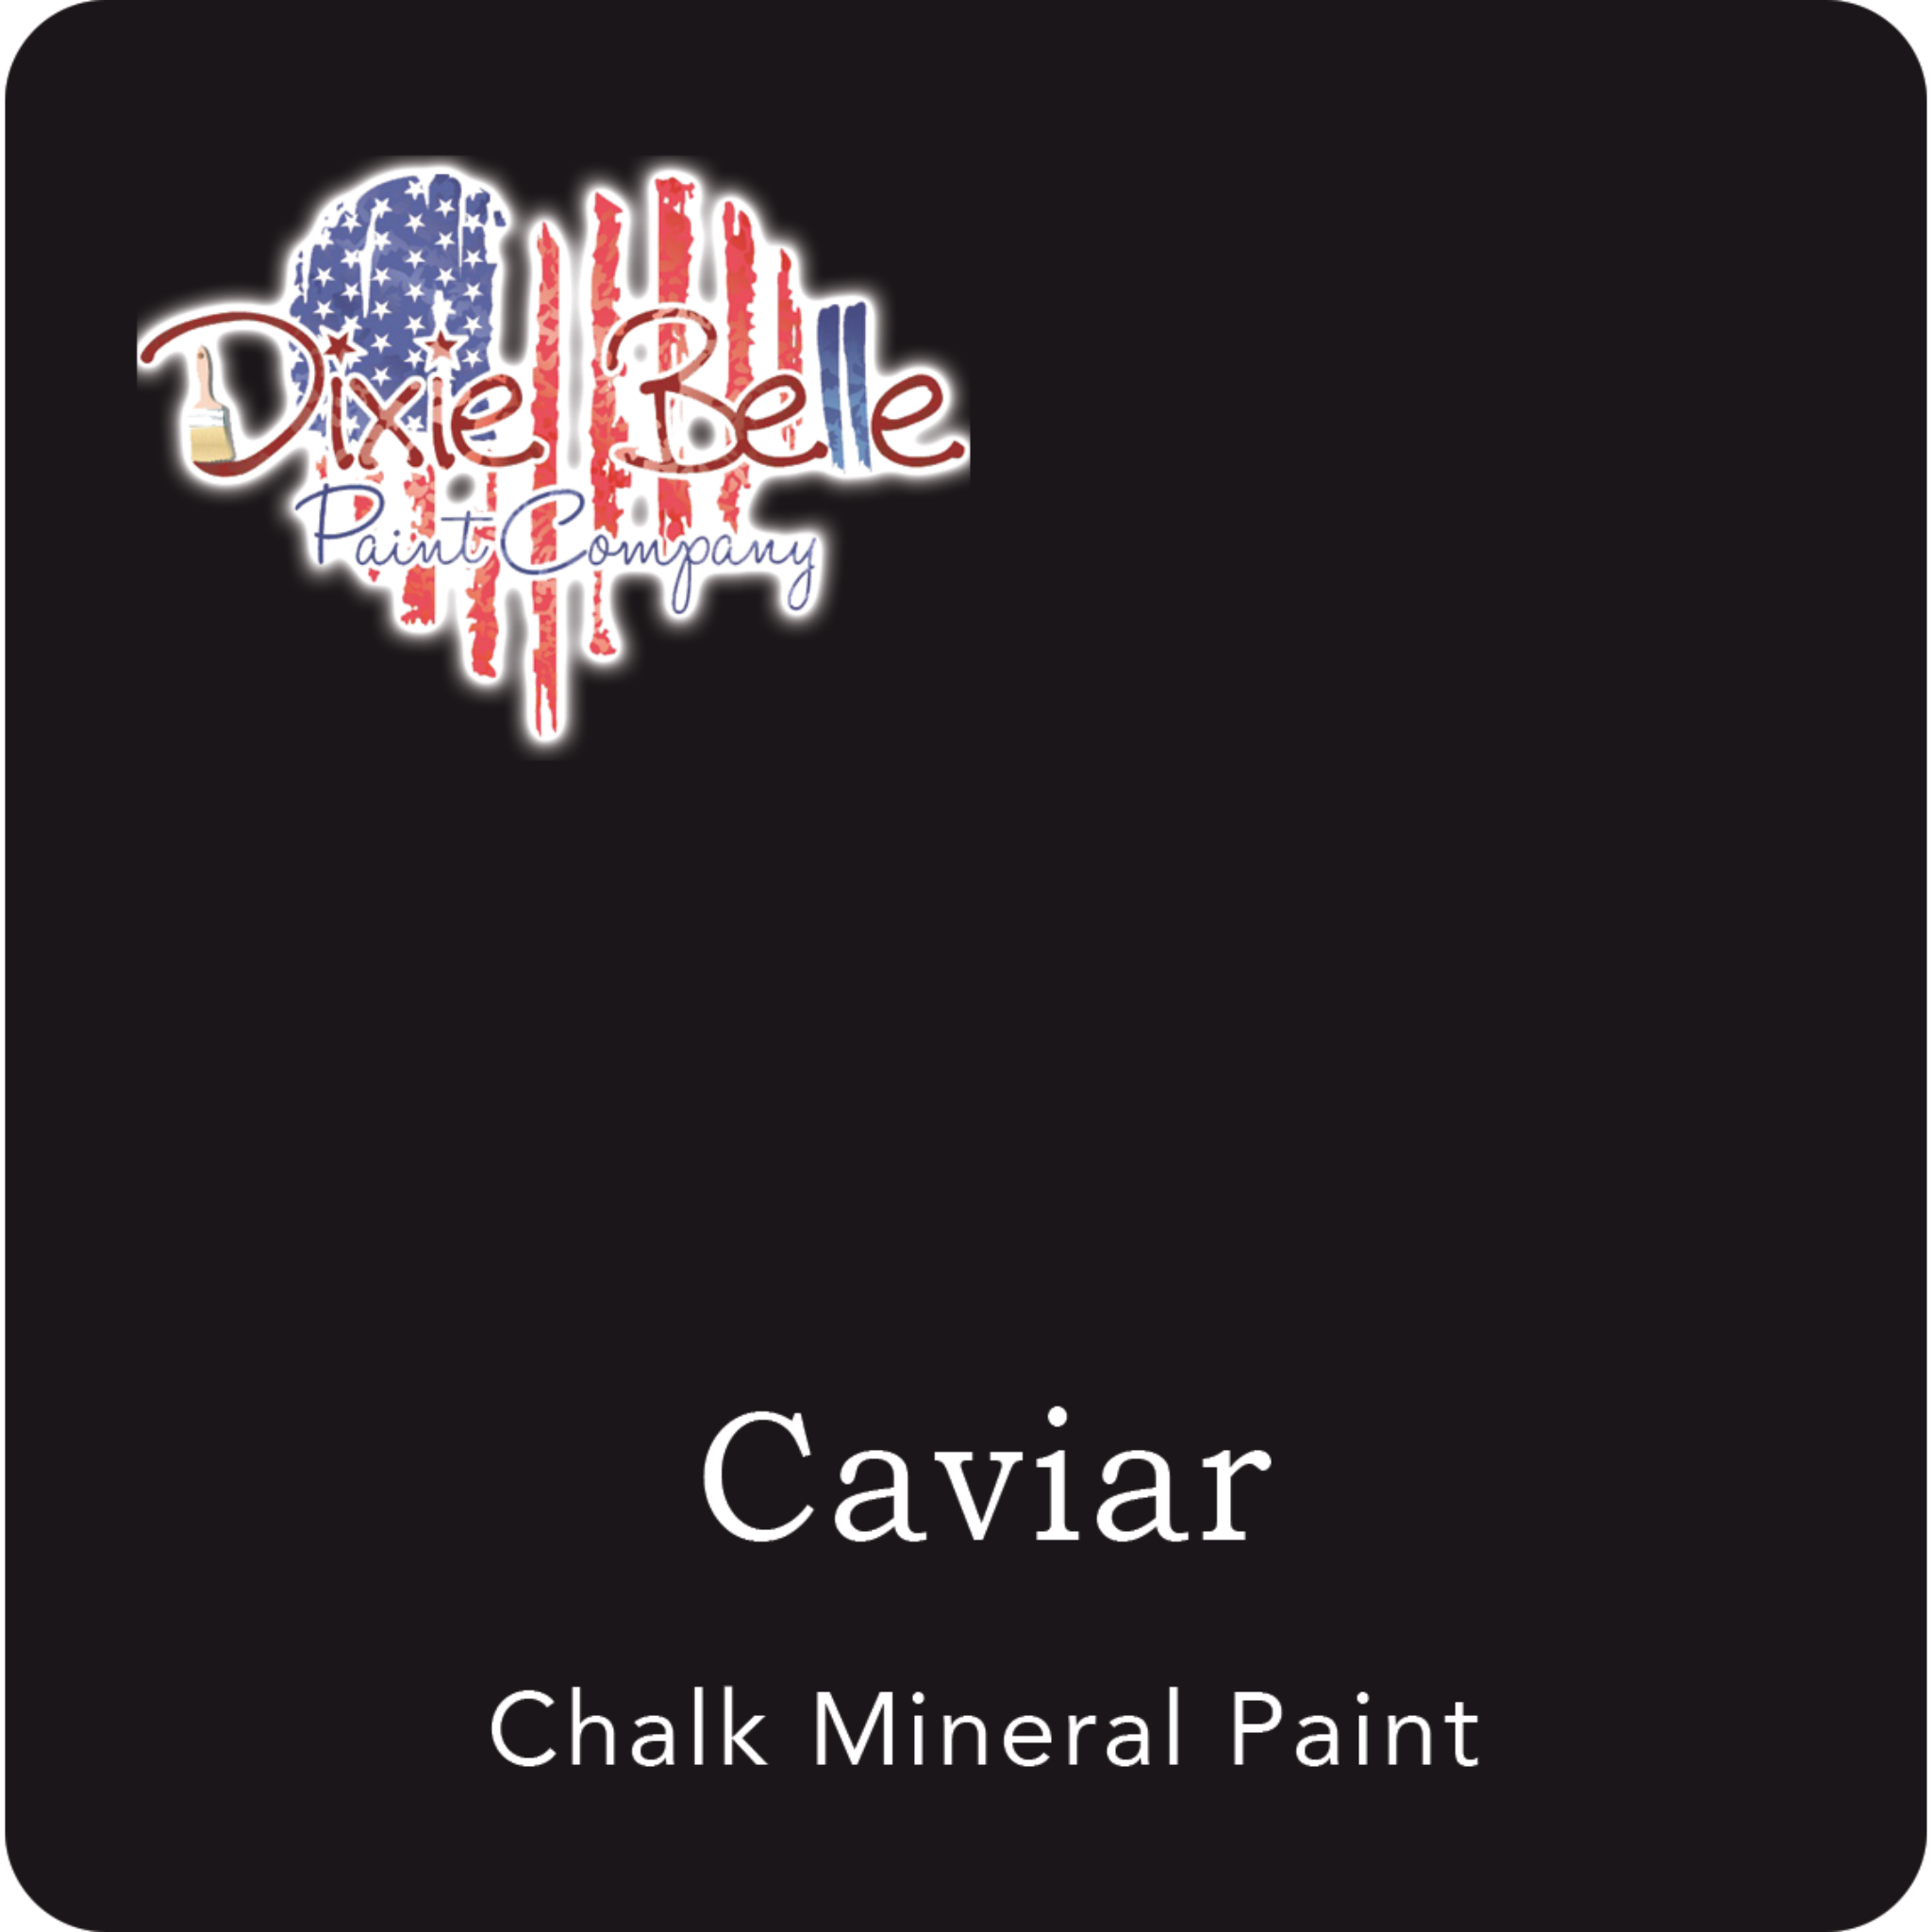 A square swatch card of Dixie Belle Paint Company’s Caviar Chalk Mineral Paint. This color is a rich deep black.